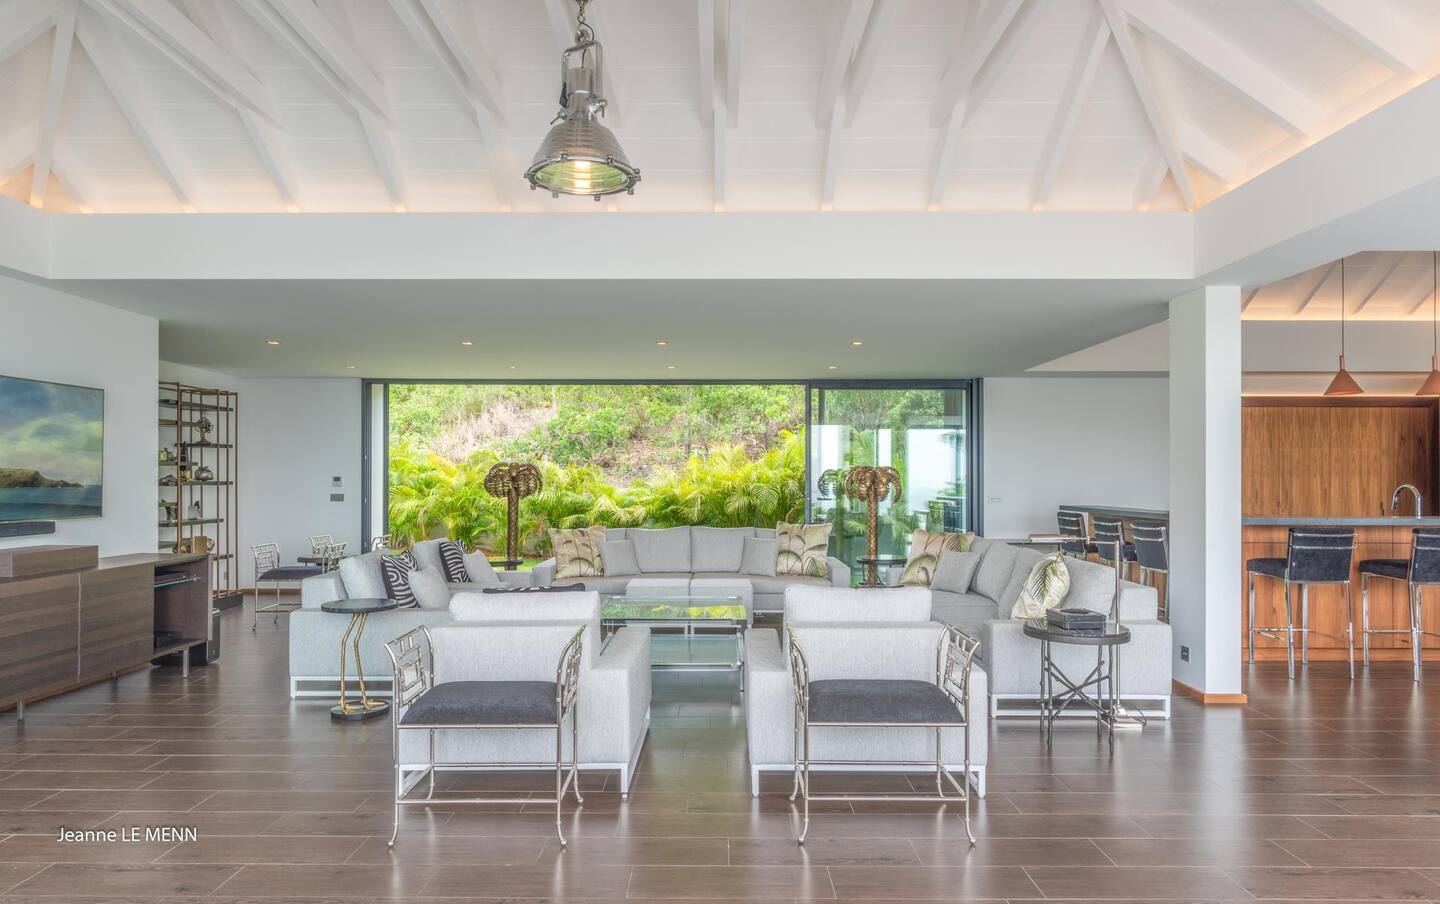 The open-plan interior seamlessly transitions into the patio.